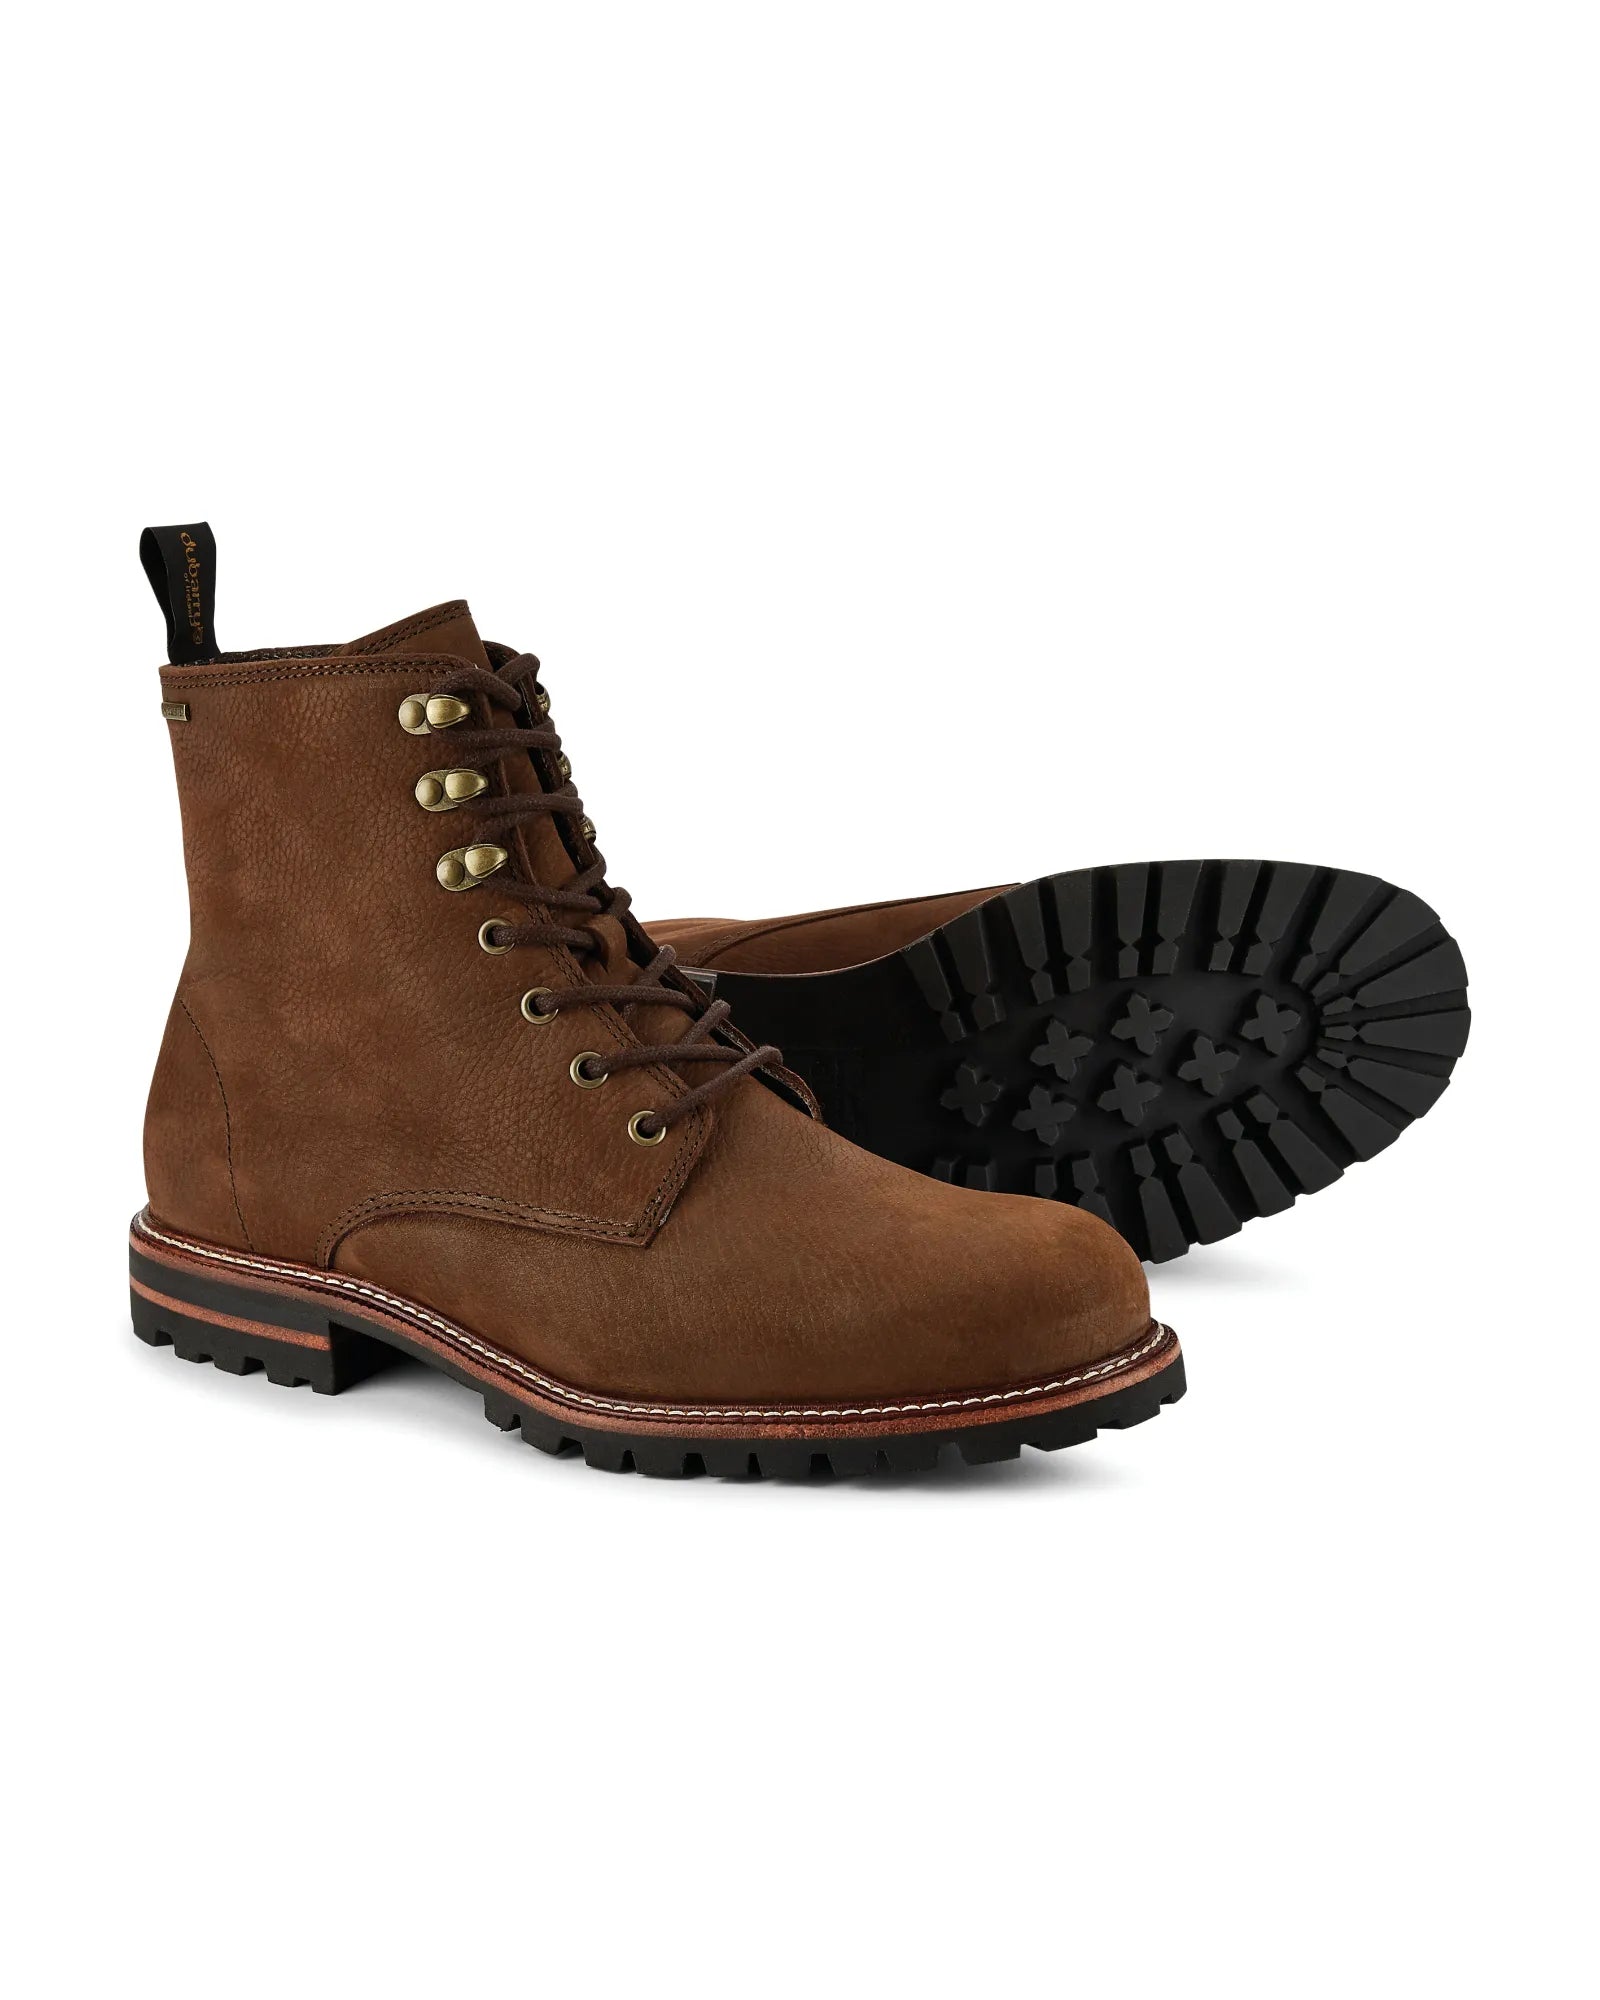 Laois Ankle Boot - Walnut